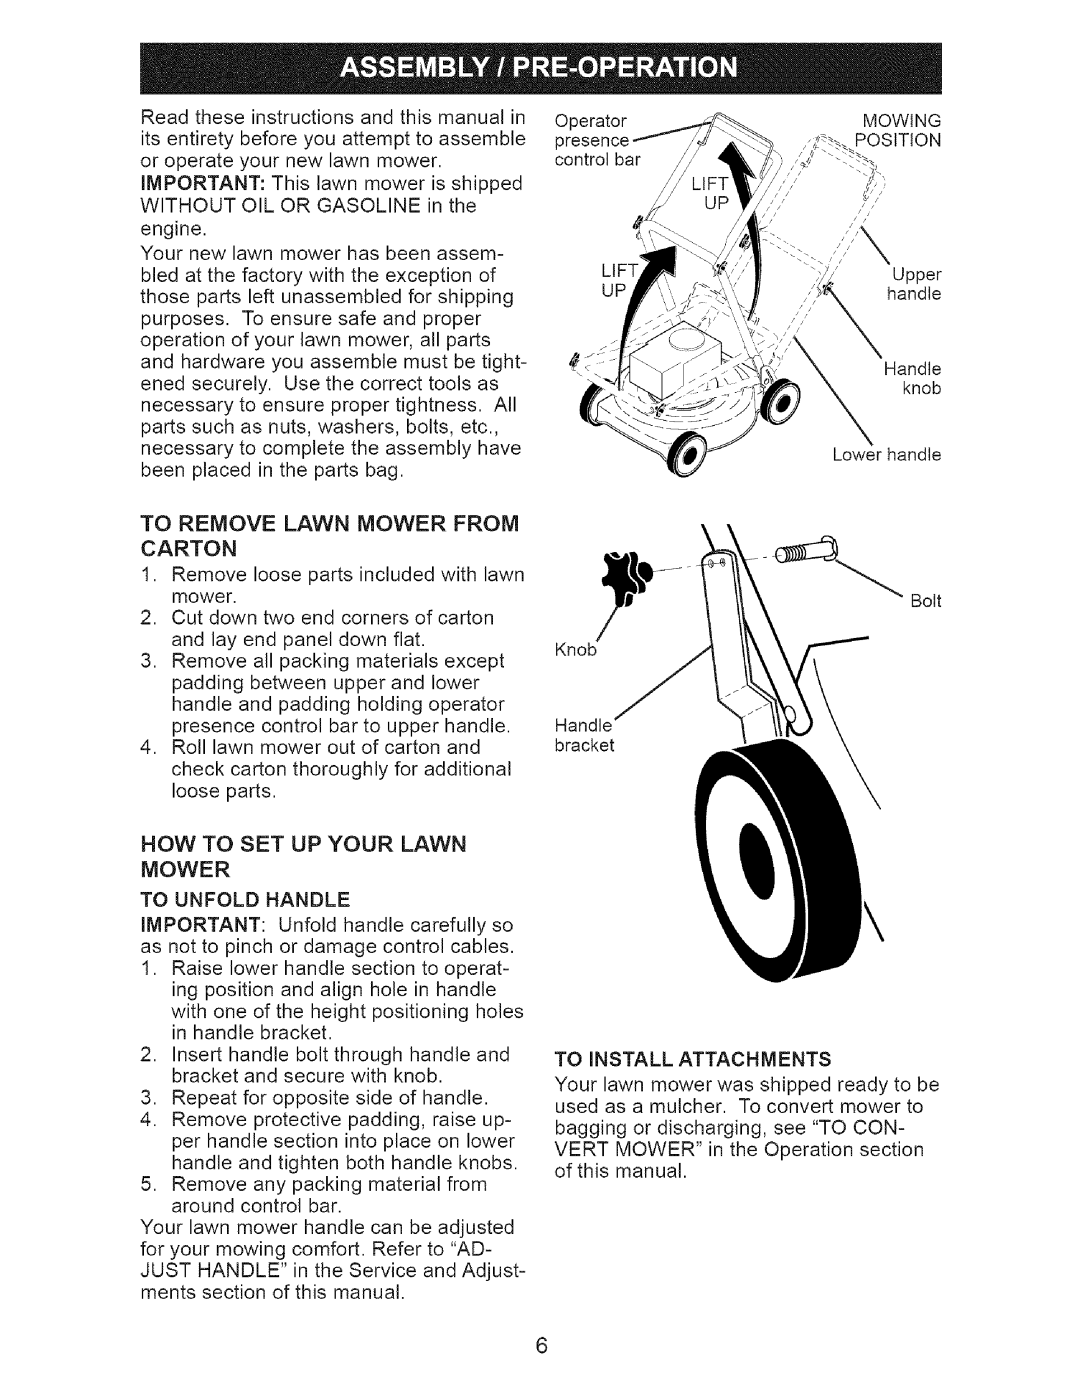 Craftsman 917.371812 owner manual How To Set Up Your Lawn, Mower 